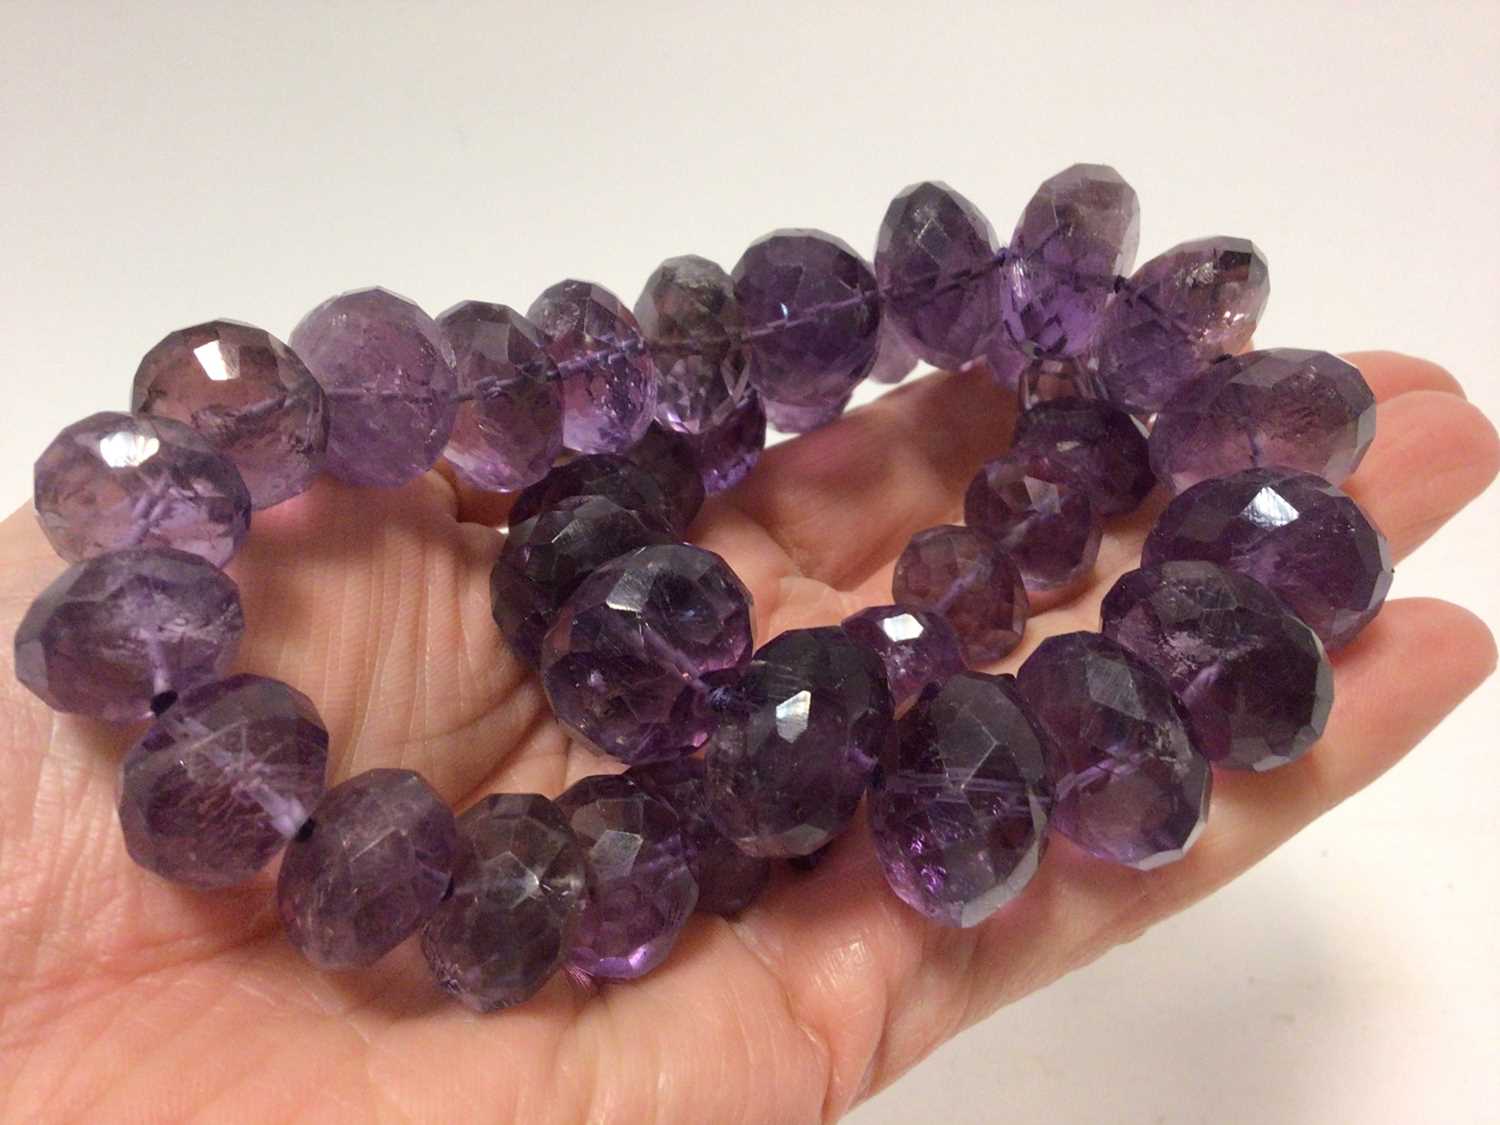 Amethyst bead necklace with a string of graduated faceted amethyst beads - Image 4 of 4